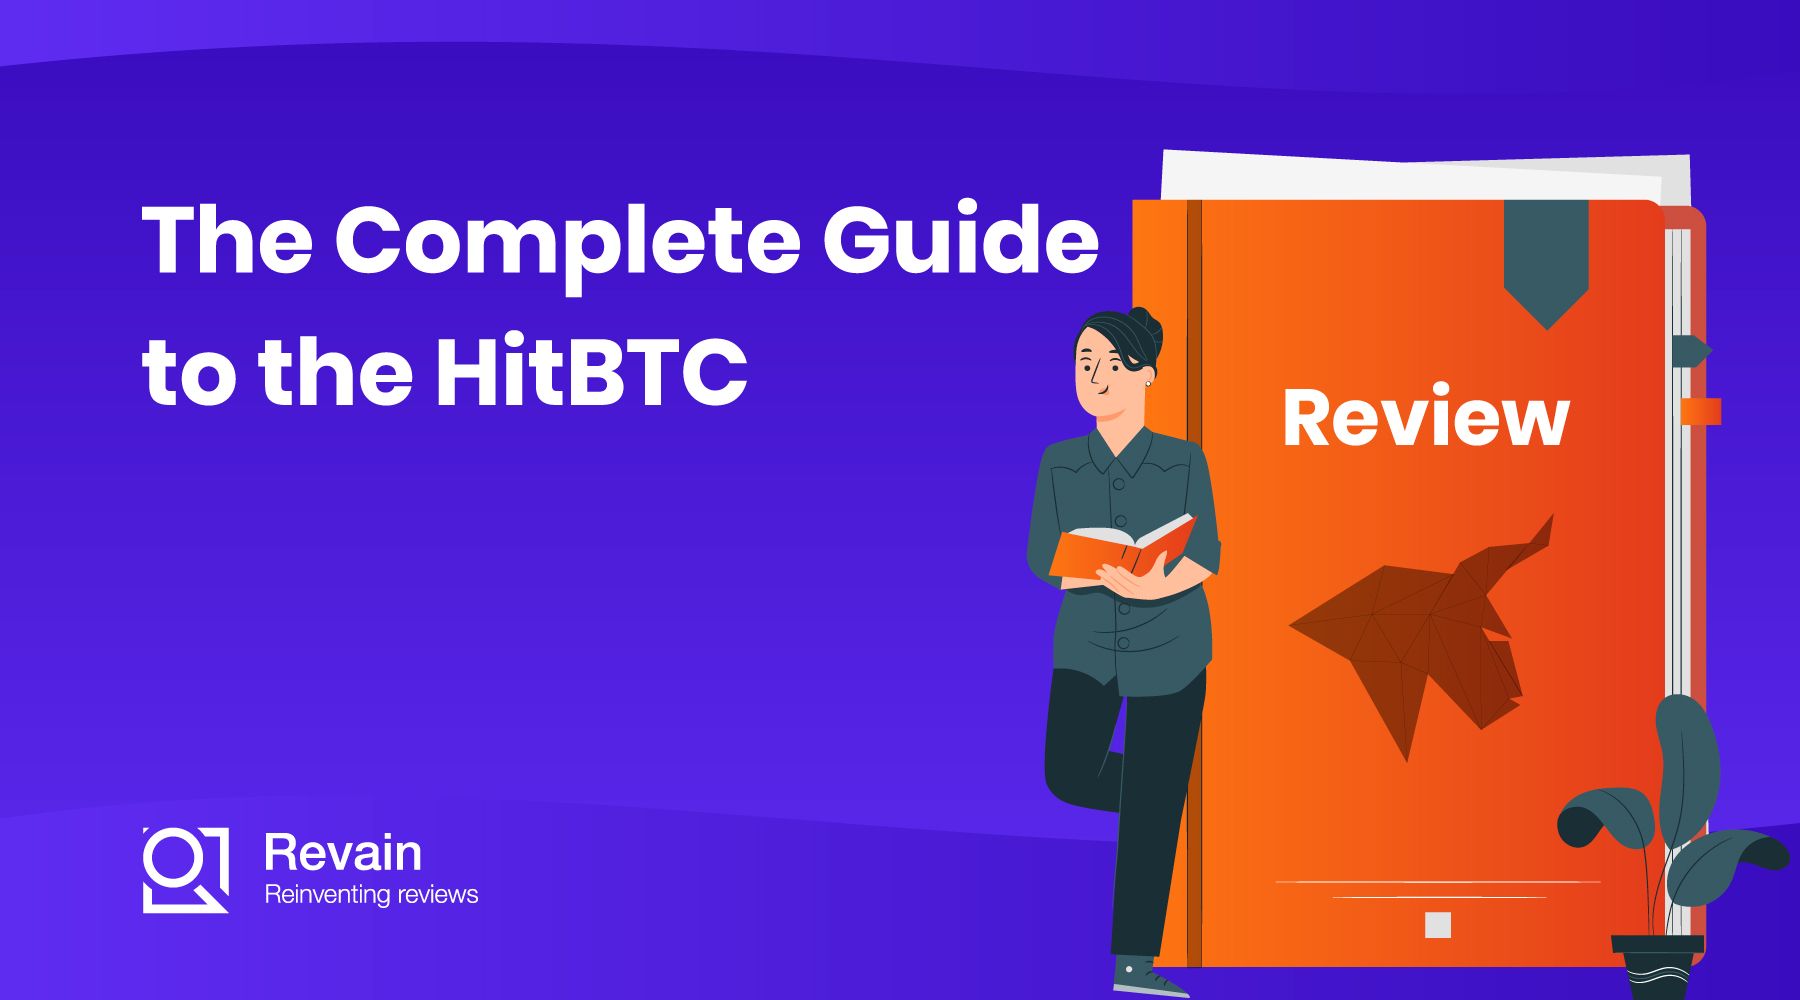 Article The Complete Guide to the HitBTC Exchange